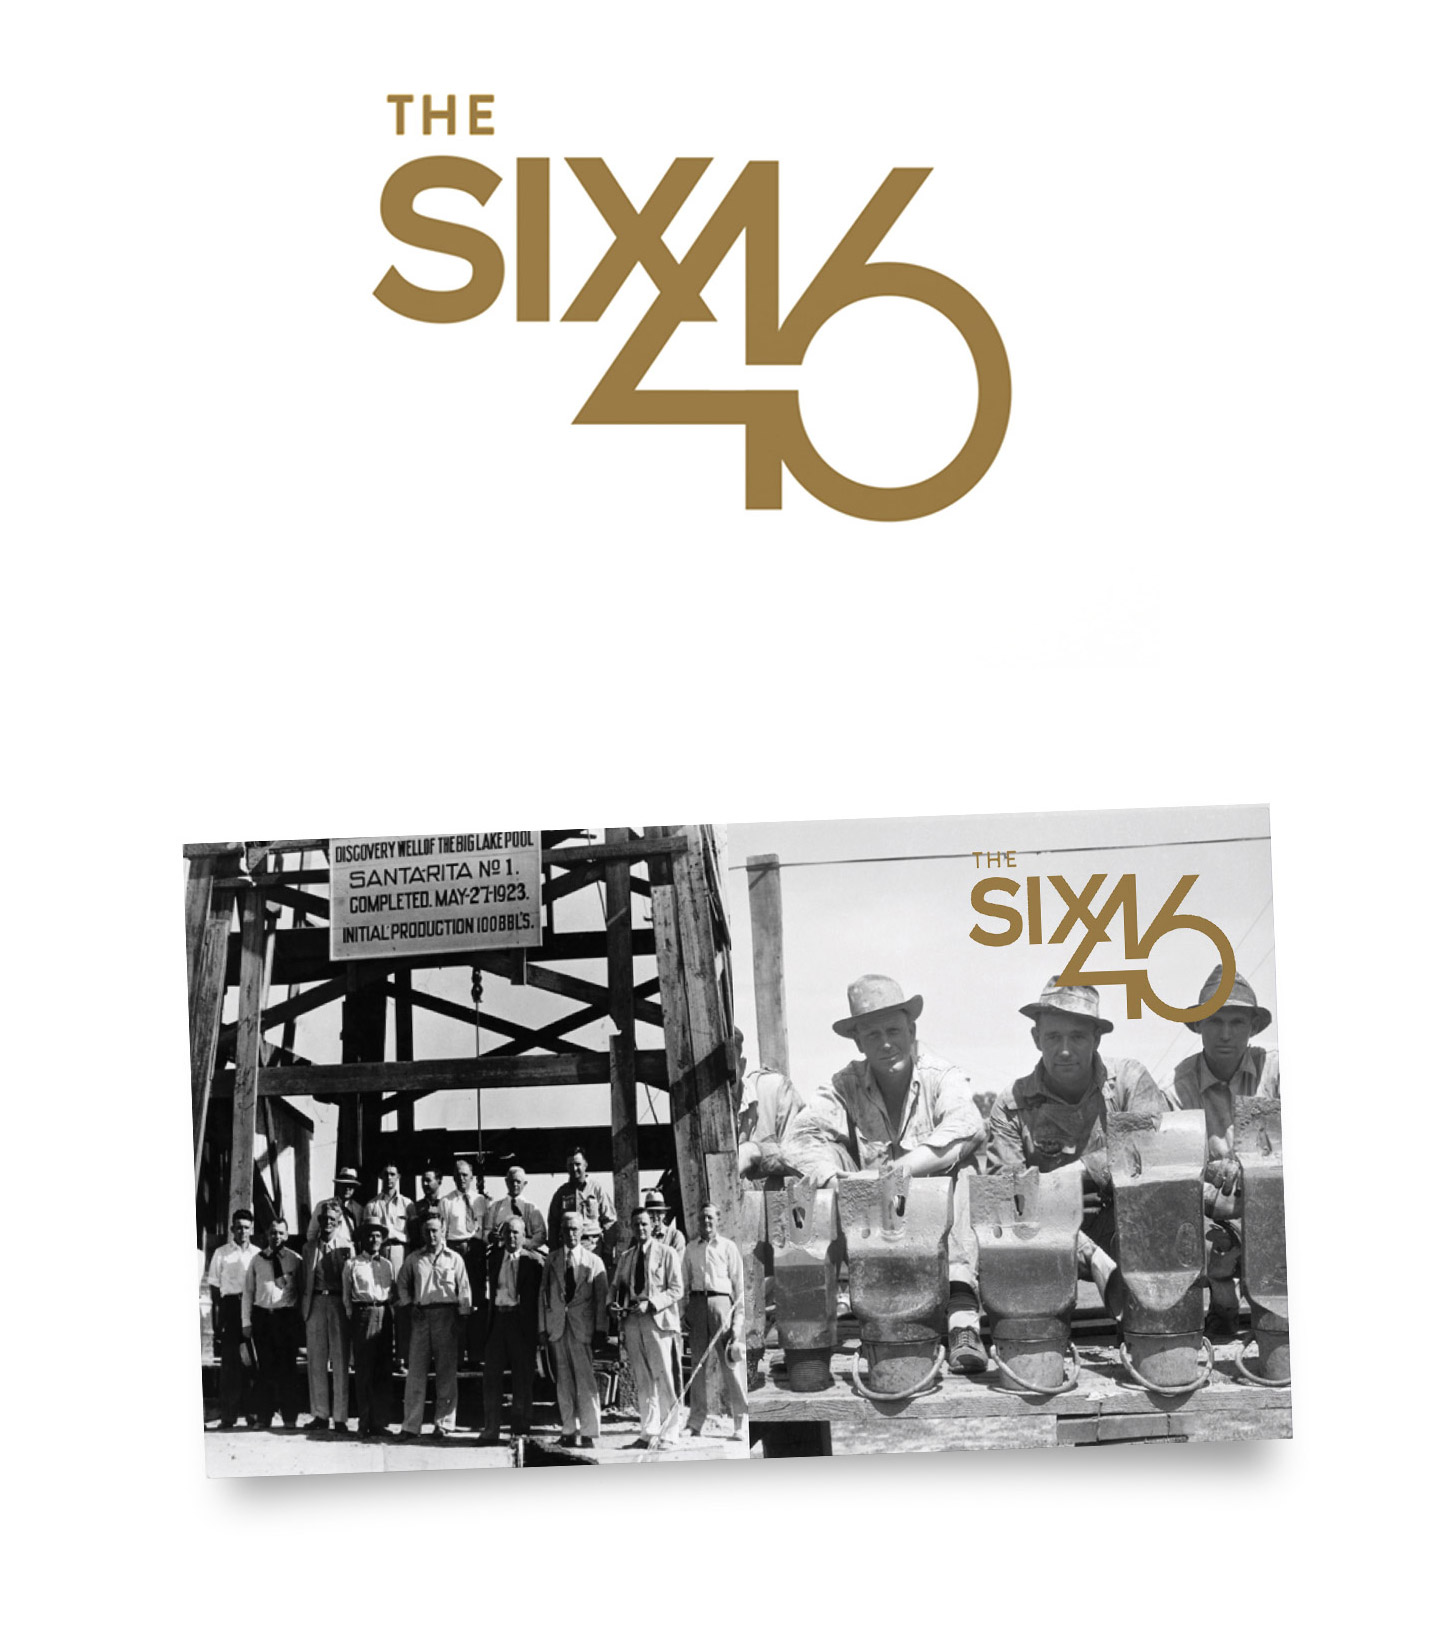 The Six46 club logo and a photograph of the men who found the first oil in Santa Rita.